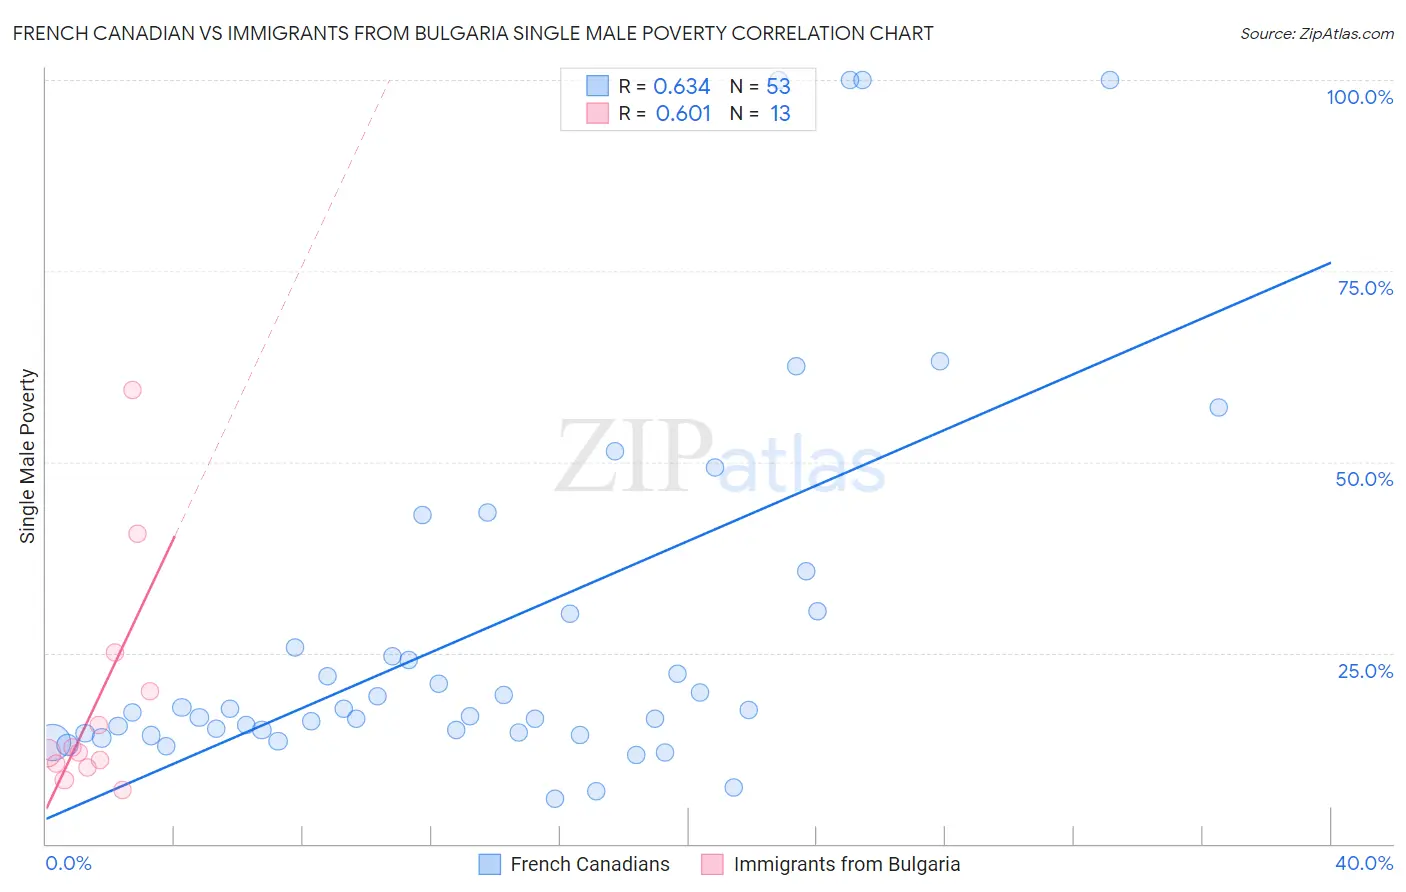 French Canadian vs Immigrants from Bulgaria Single Male Poverty